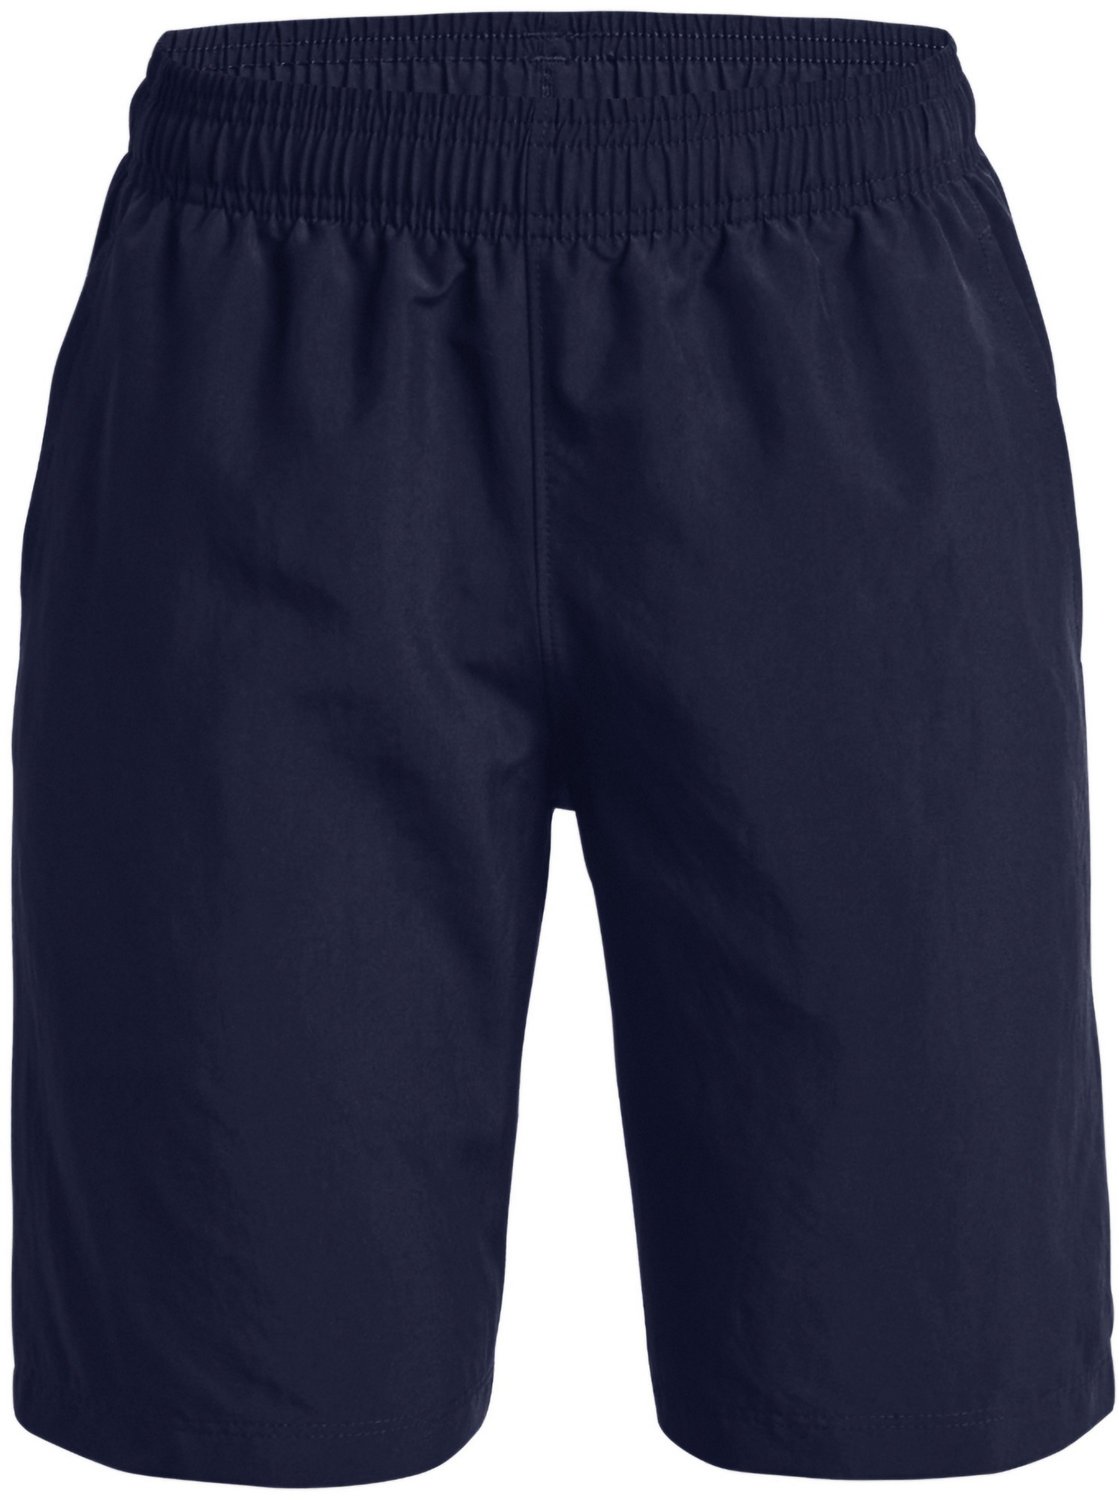 Under Armour Boys Woven Graphic Shorts